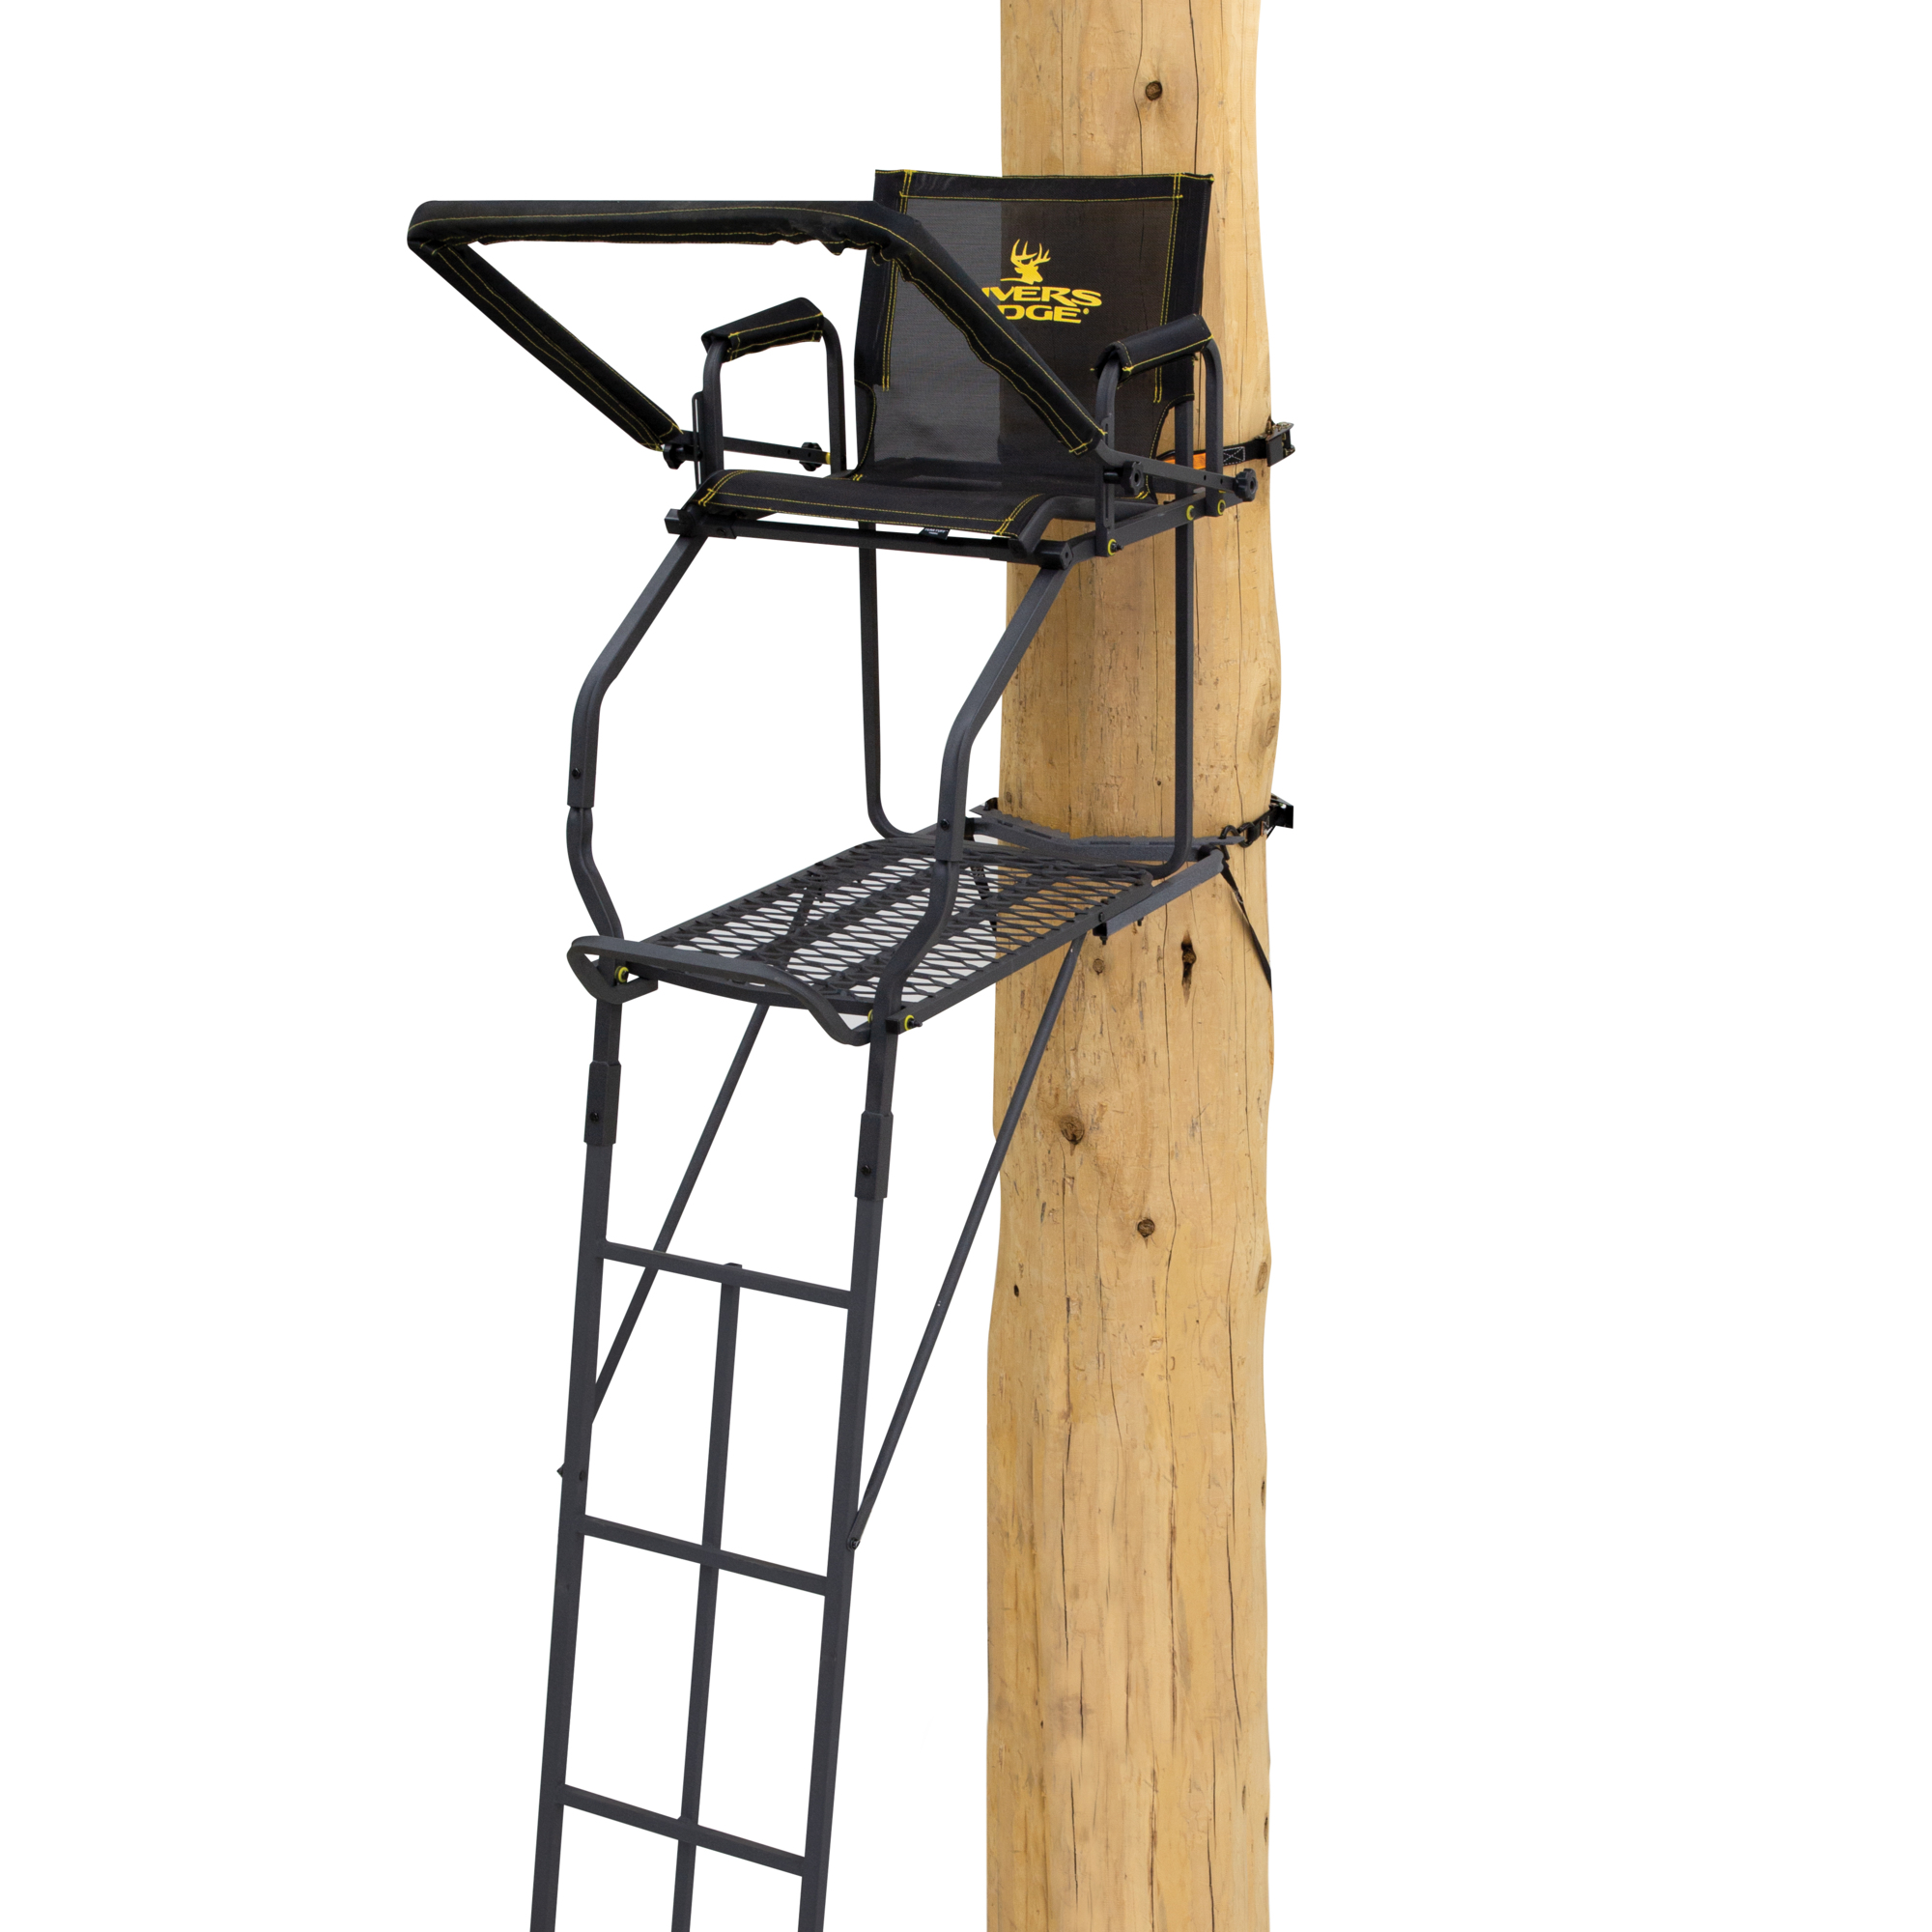 Rivers Edge, Uppercut 1-Man Ladder Stand, 22ft.3Inch Height, Color Black, Material Steel, Model RE659